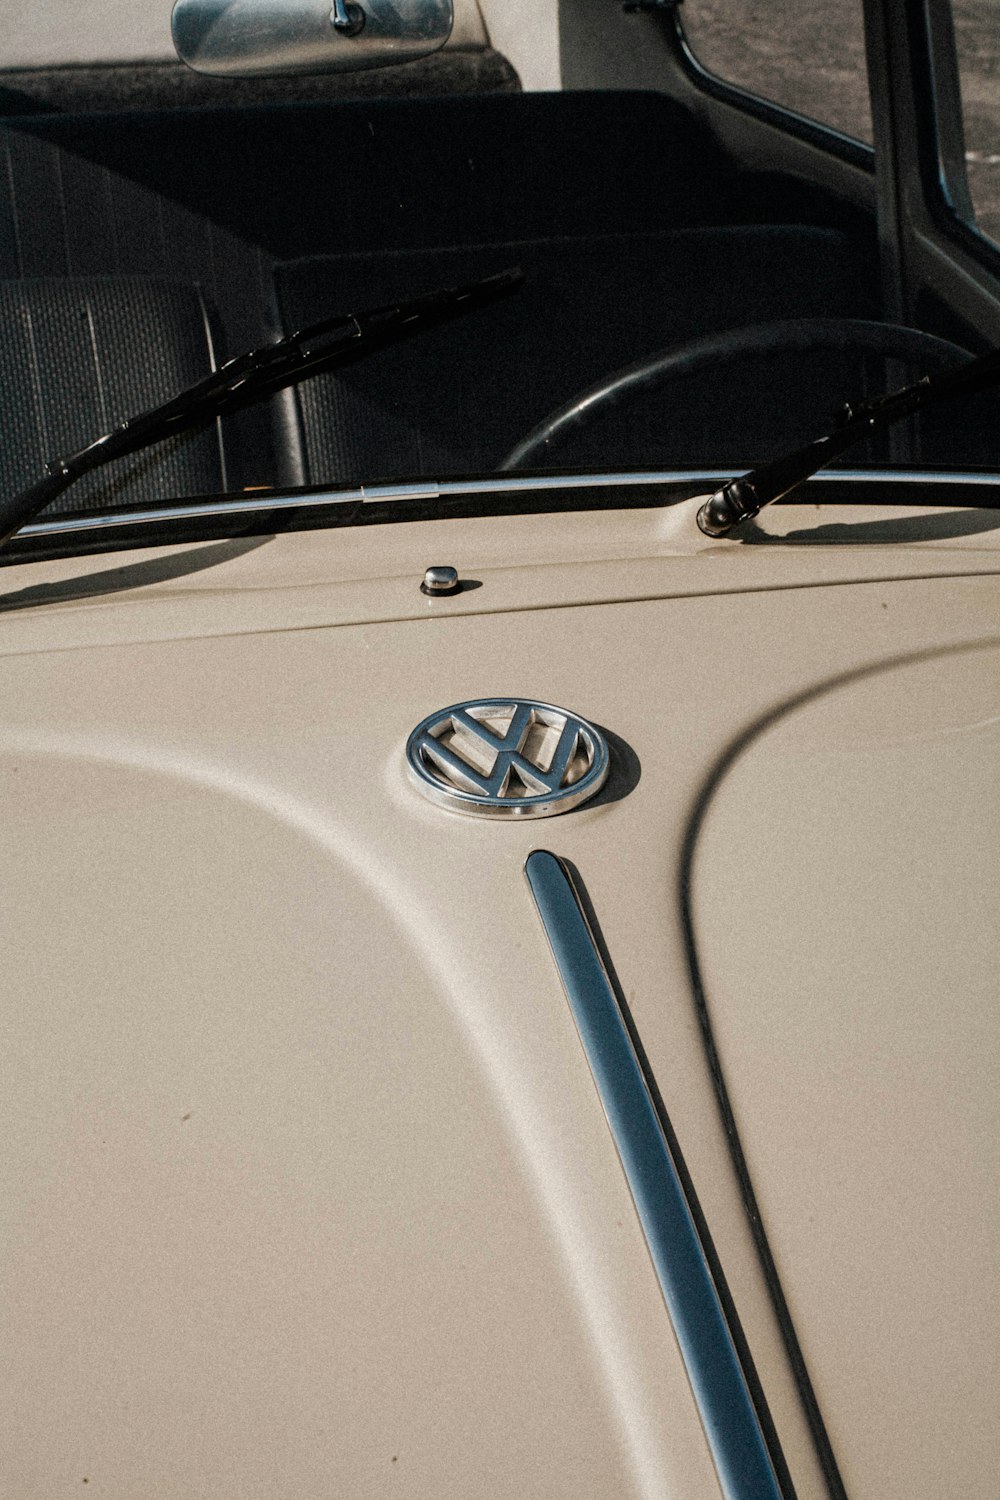 a close up of the emblem on the front of a car